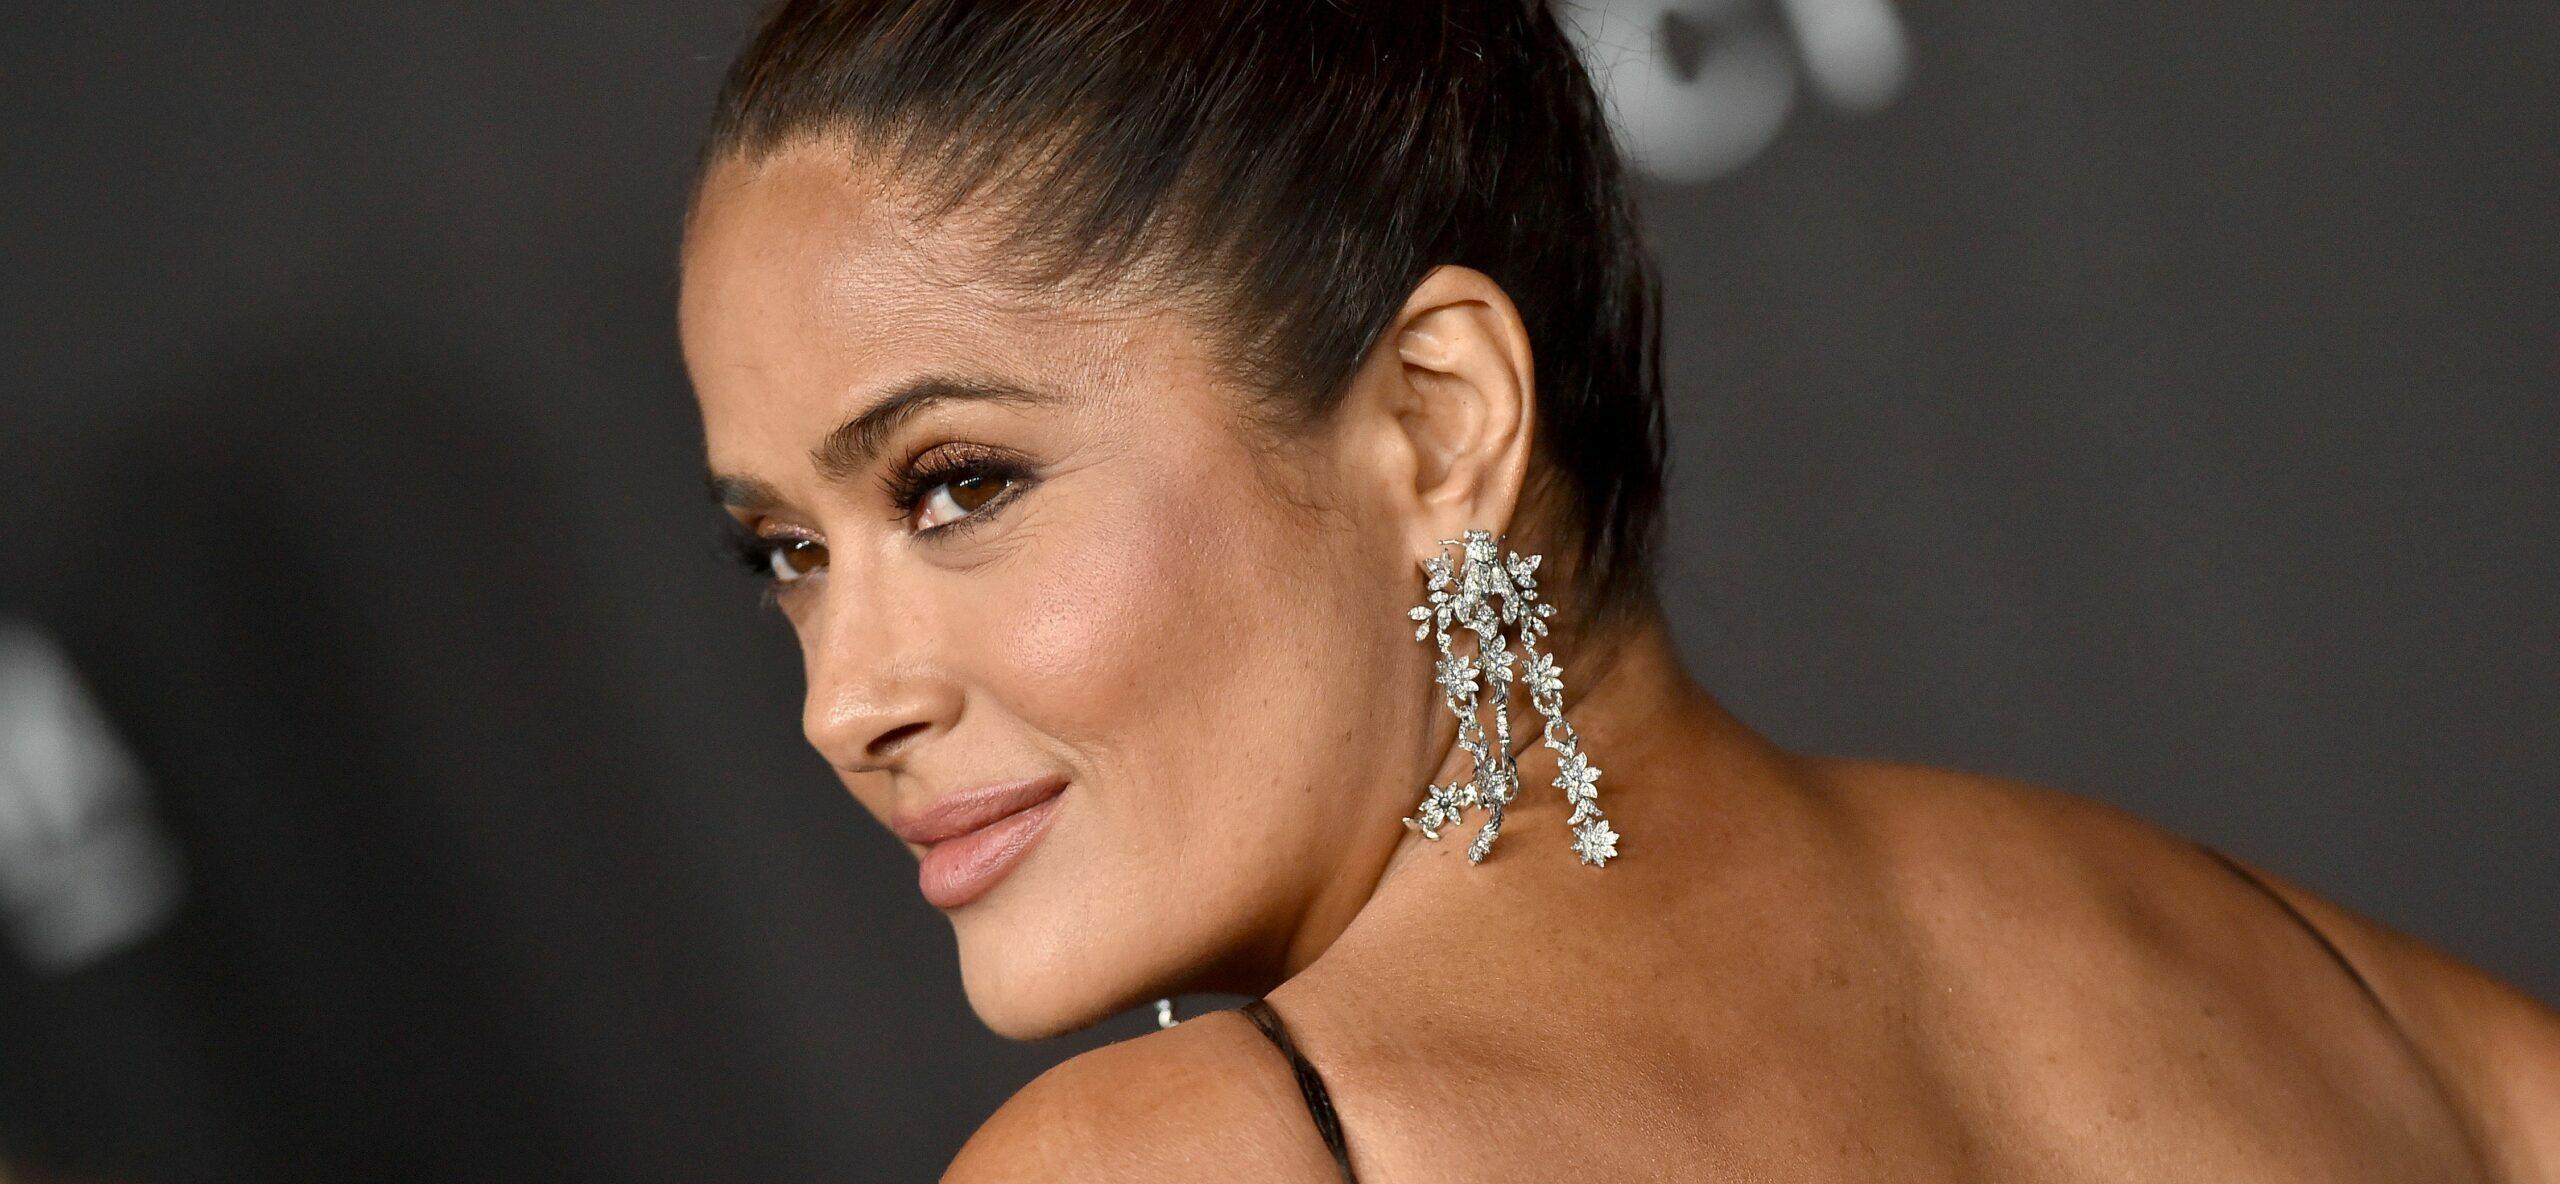 Salma Hayek Celebrates Father’s Day With Throwback Swimsuit Snap